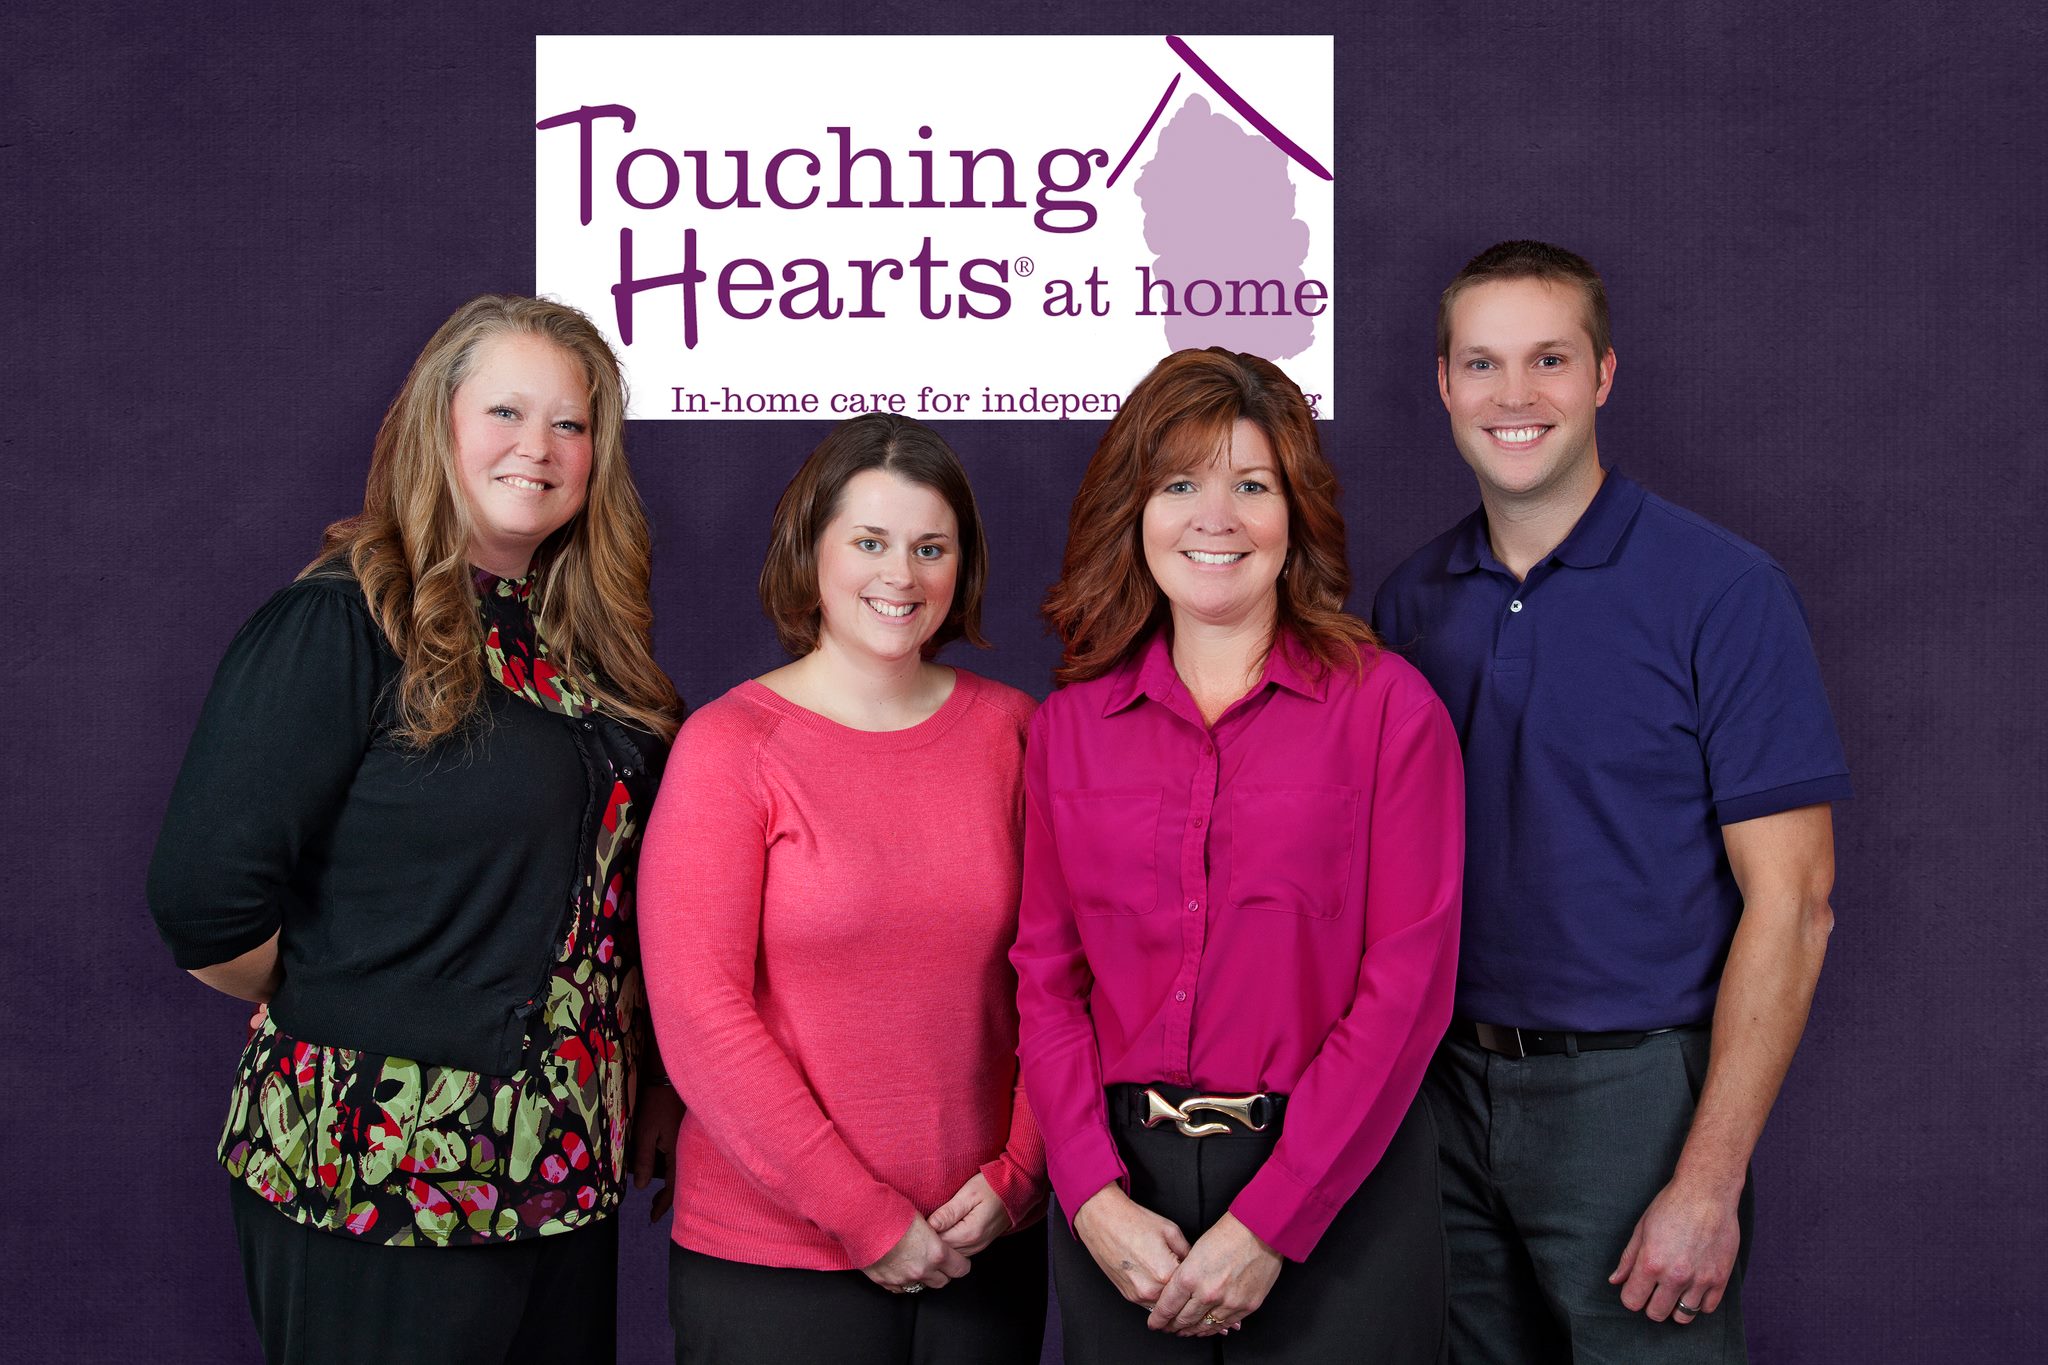 Touching Hearts franchisee opportuinty